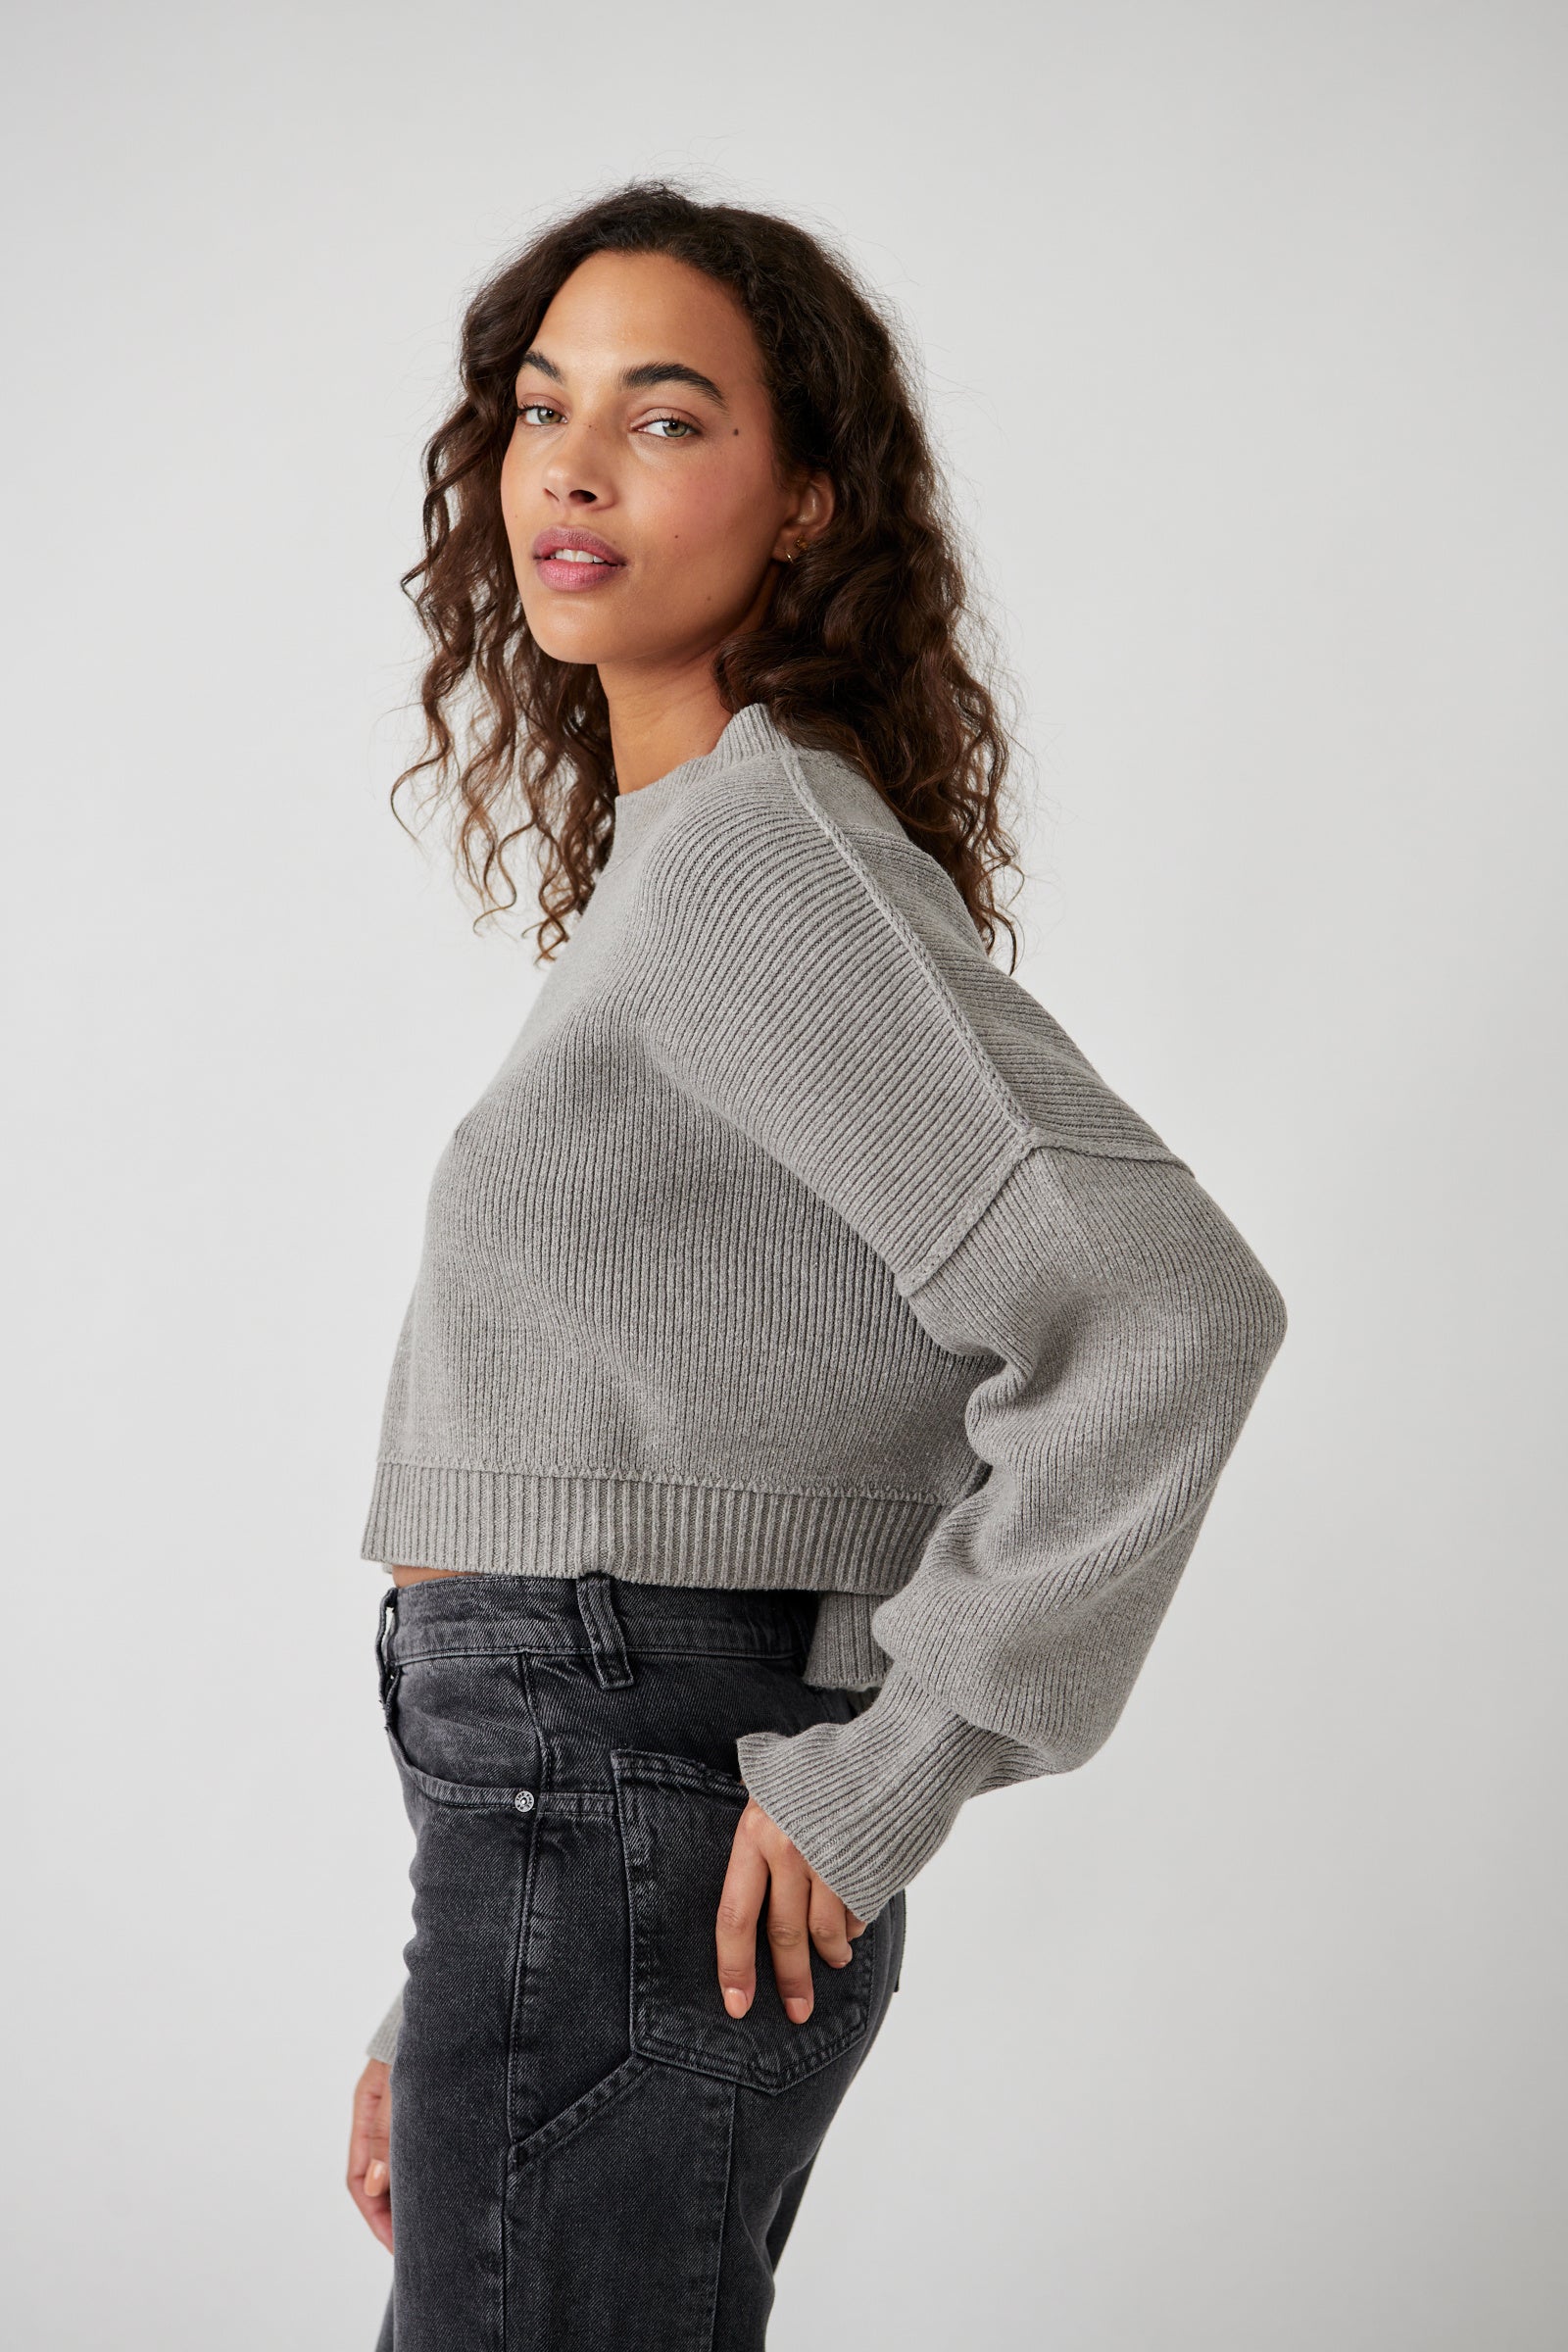 FREE PEOPLE EASY STREET CROP PULLOVER IN HEATHER GREY